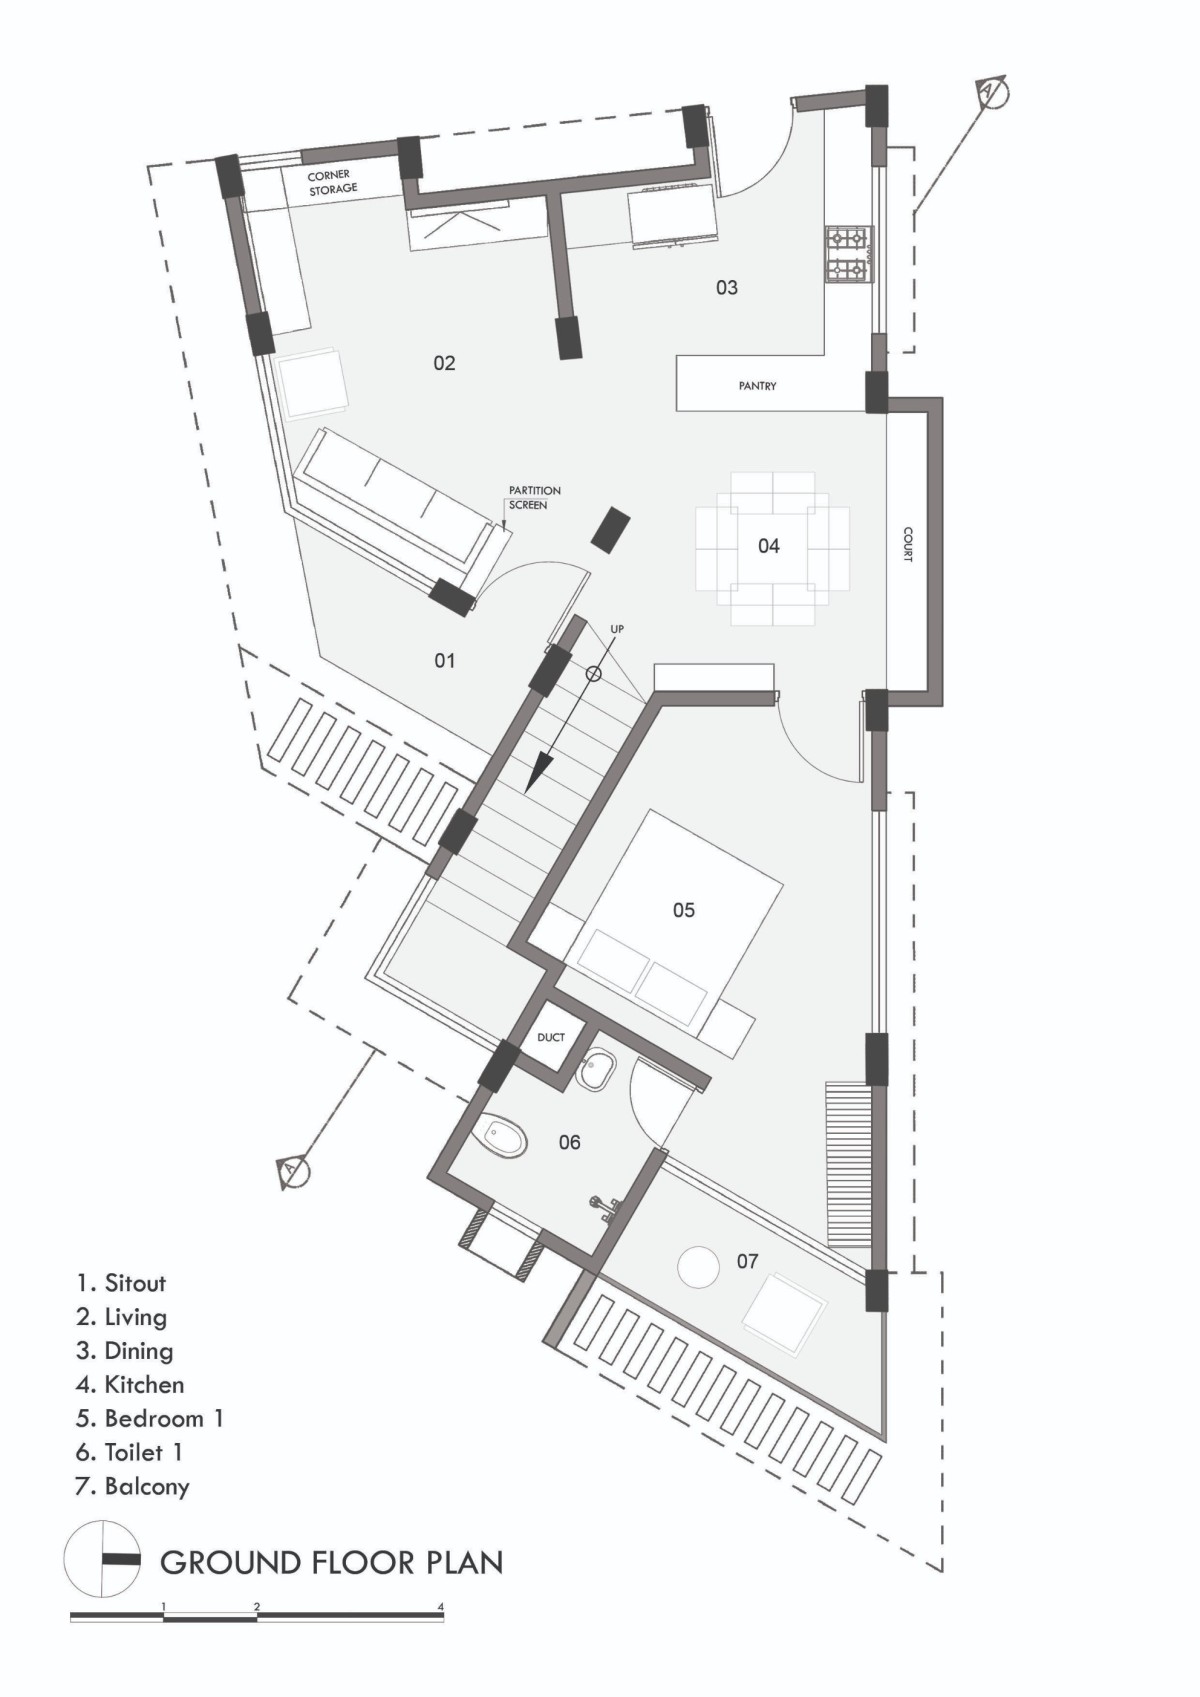 Ground floor plan of The N’Arrow House by Designloom Architects